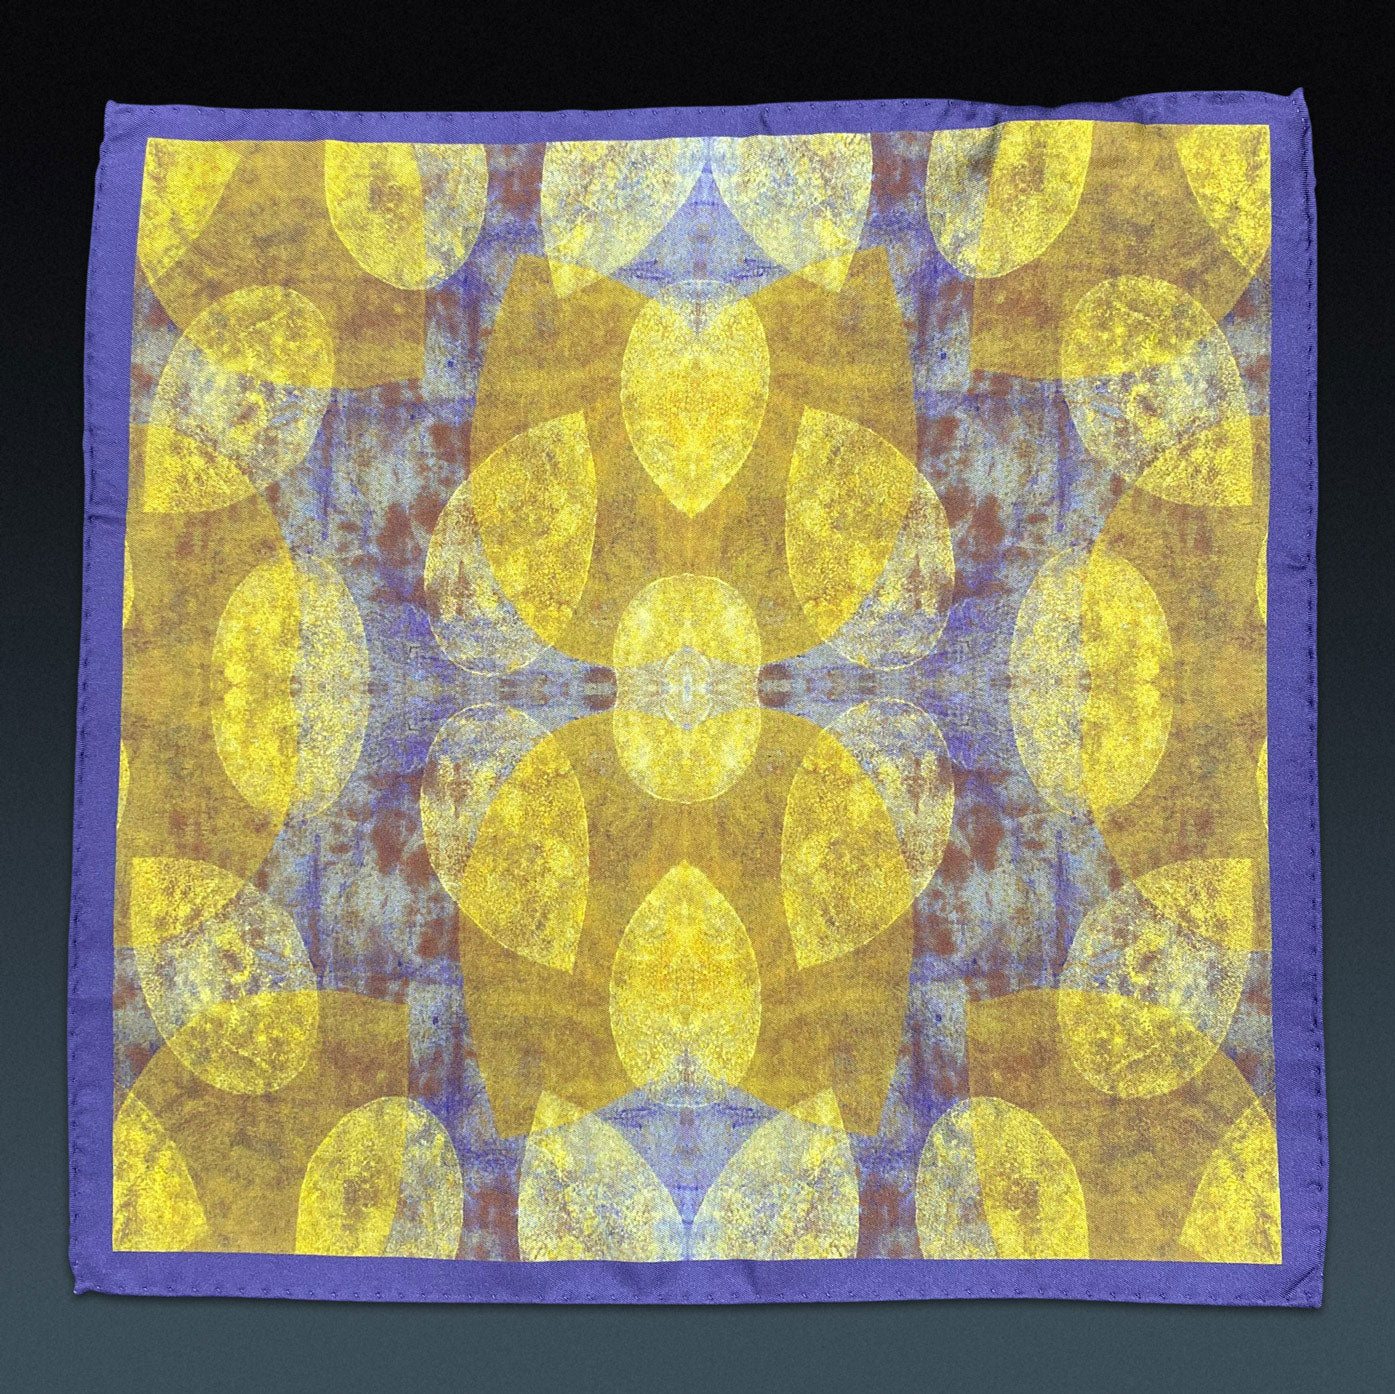 Fully unfolded 'Tweed' silk pocket square, showing the pattern of stylised leaf forms creating a yellow and purple textured effect.